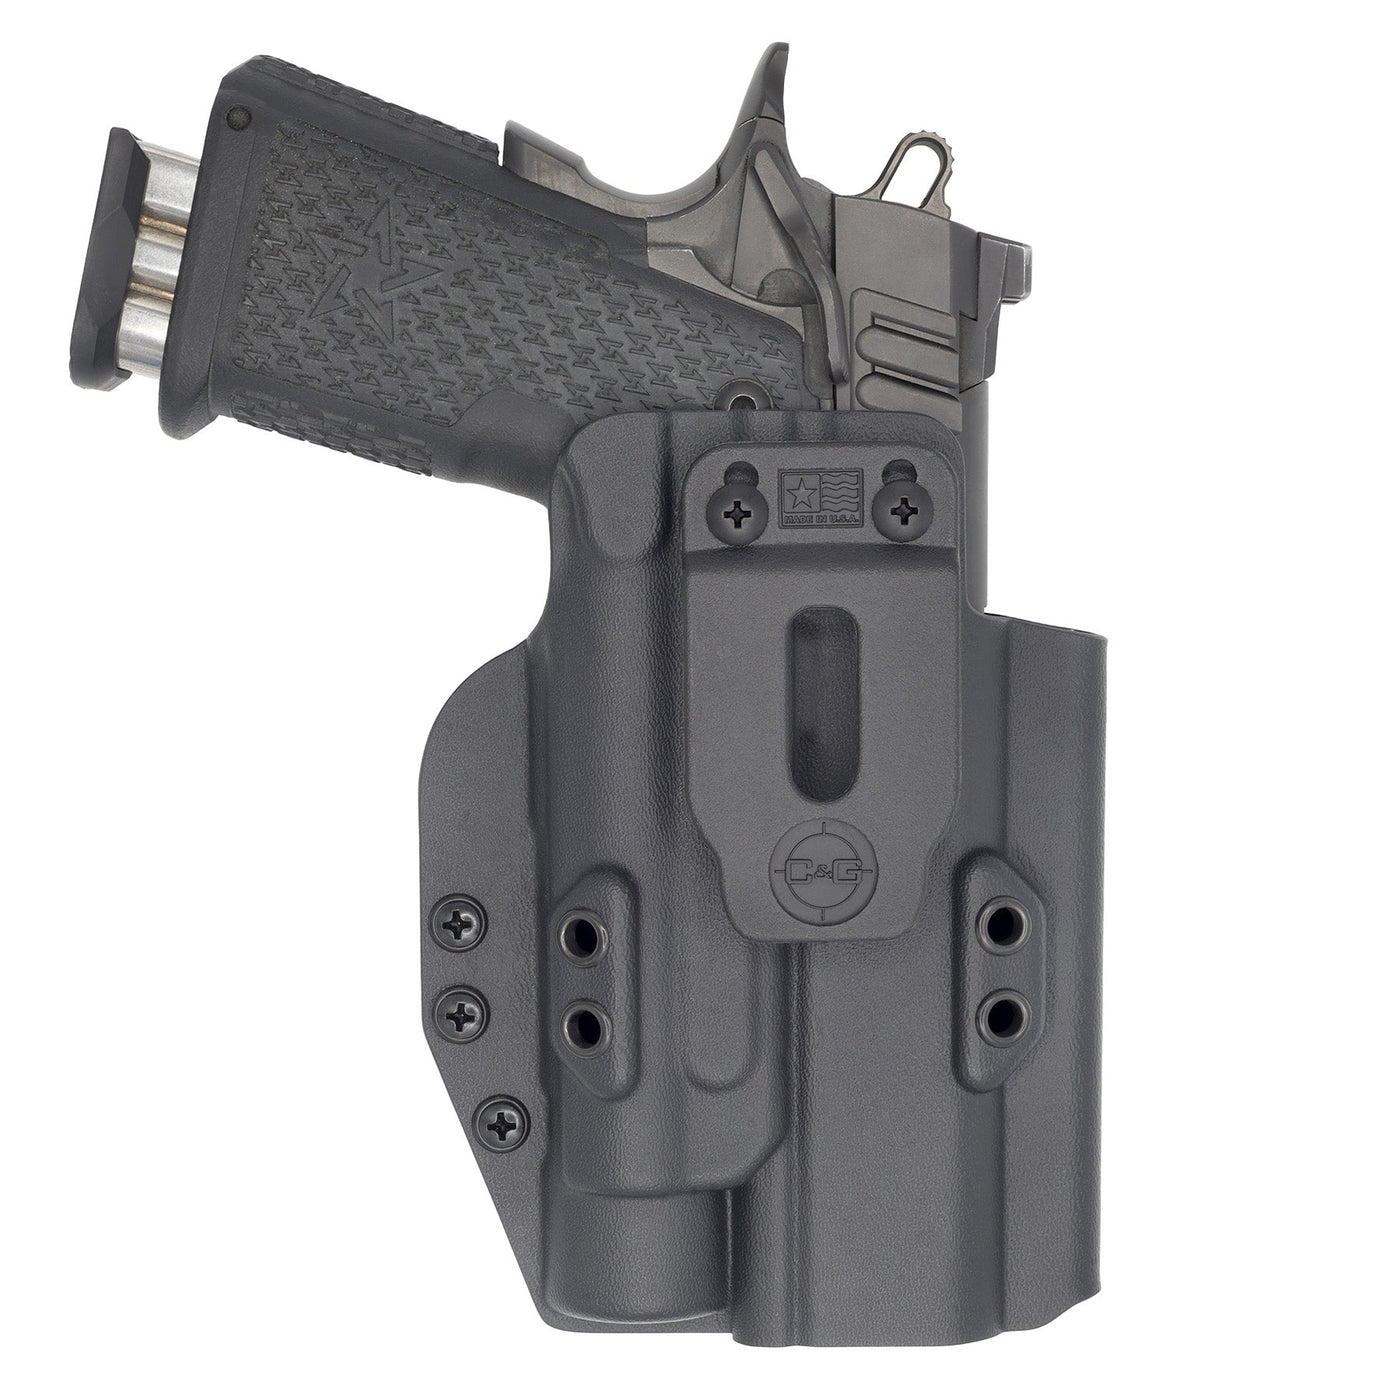 C&G Holsters custom IWB Tactical 1911 DS Prodigy TLR1 in holstered position